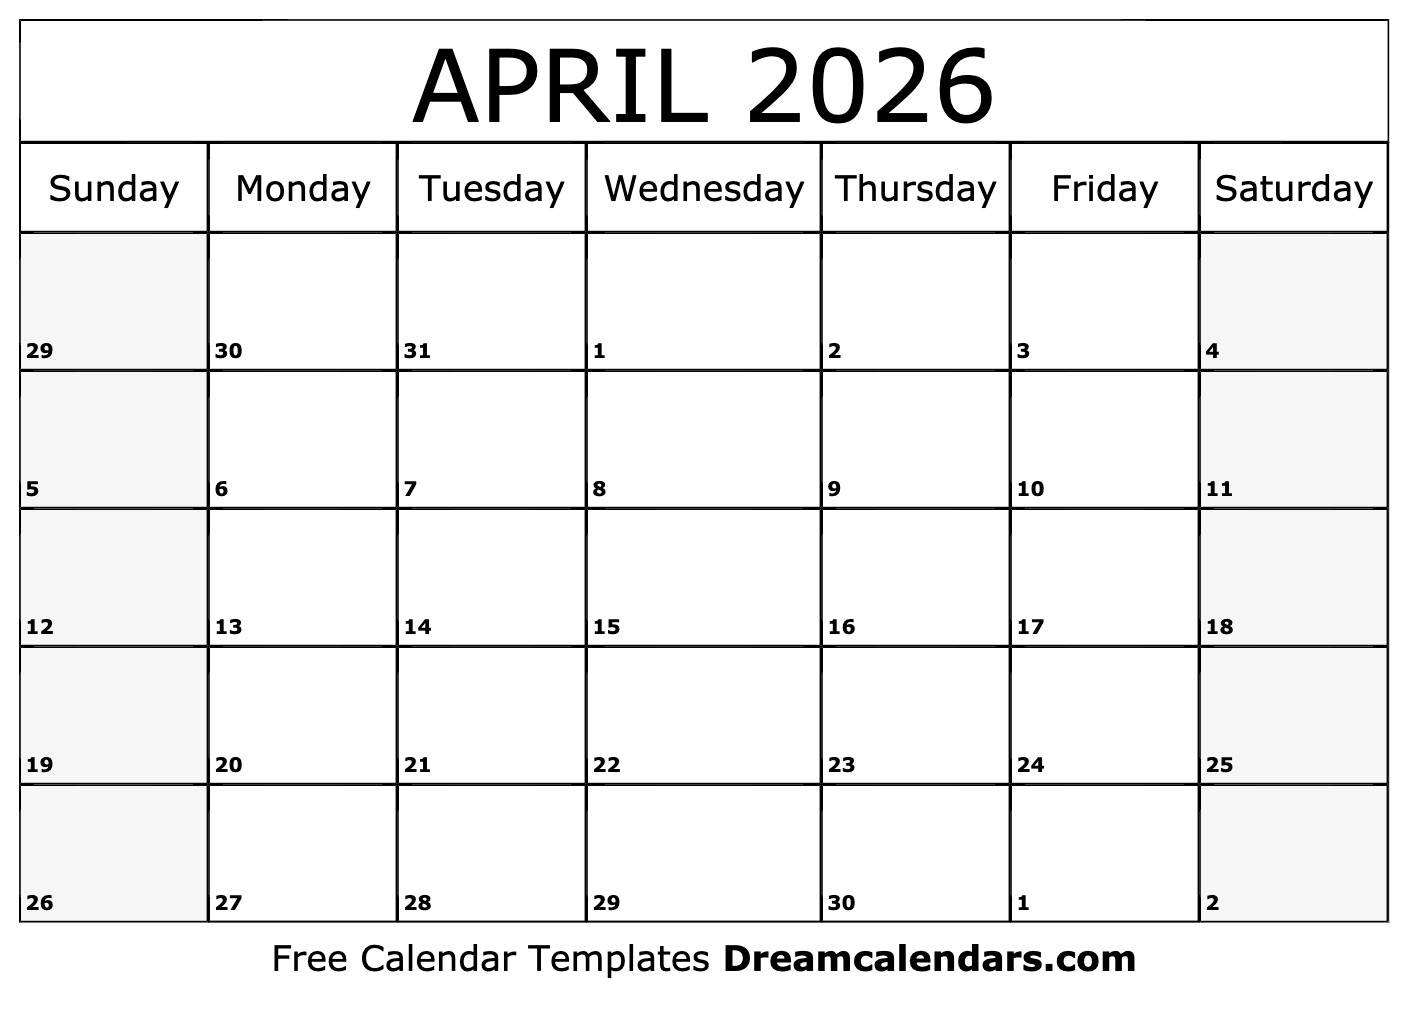 April 2026 Calendar - Free Printable with Holidays and Observances